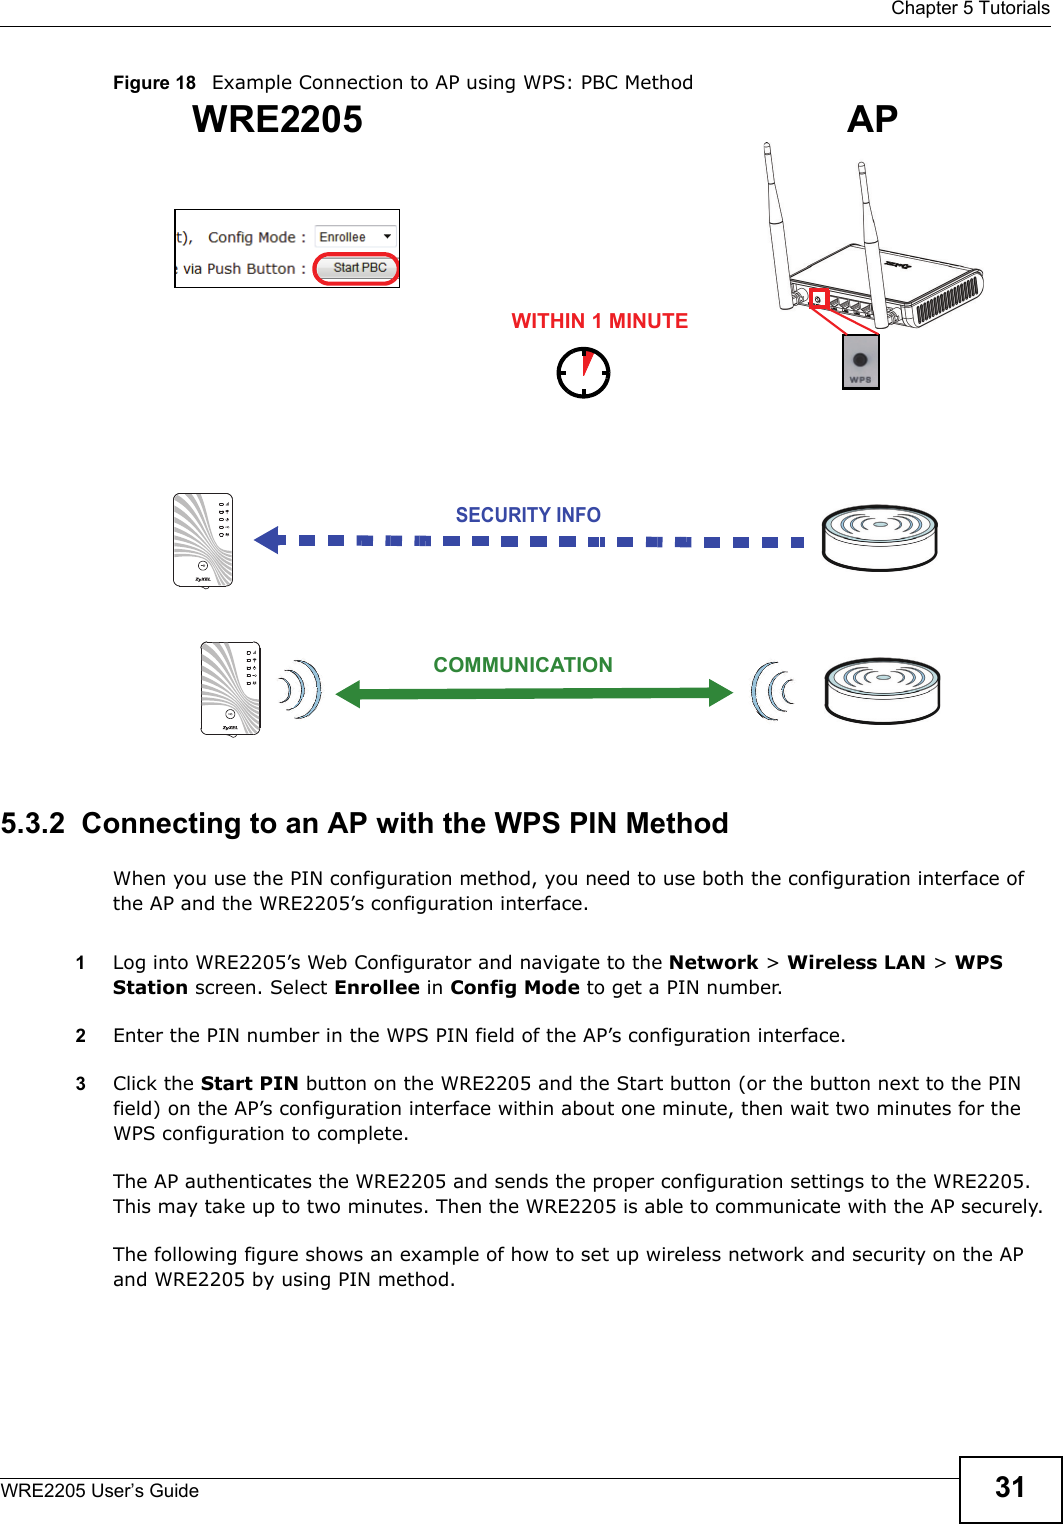  Chapter 5 TutorialsWRE2205 User’s Guide 31Figure 18   Example Connection to AP using WPS: PBC Method5.3.2  Connecting to an AP with the WPS PIN MethodWhen you use the PIN configuration method, you need to use both the configuration interface of the AP and the WRE2205’s configuration interface.1Log into WRE2205’s Web Configurator and navigate to the Network &gt; Wireless LAN &gt; WPS Station screen. Select Enrollee in Config Mode to get a PIN number.2Enter the PIN number in the WPS PIN field of the AP’s configuration interface.3Click the Start PIN button on the WRE2205 and the Start button (or the button next to the PIN field) on the AP’s configuration interface within about one minute, then wait two minutes for the WPS configuration to complete.The AP authenticates the WRE2205 and sends the proper configuration settings to the WRE2205. This may take up to two minutes. Then the WRE2205 is able to communicate with the AP securely. The following figure shows an example of how to set up wireless network and security on the AP and WRE2205 by using PIN method. WRE2205SECURITY INFOCOMMUNICATIONWITHIN 1 MINUTEAP